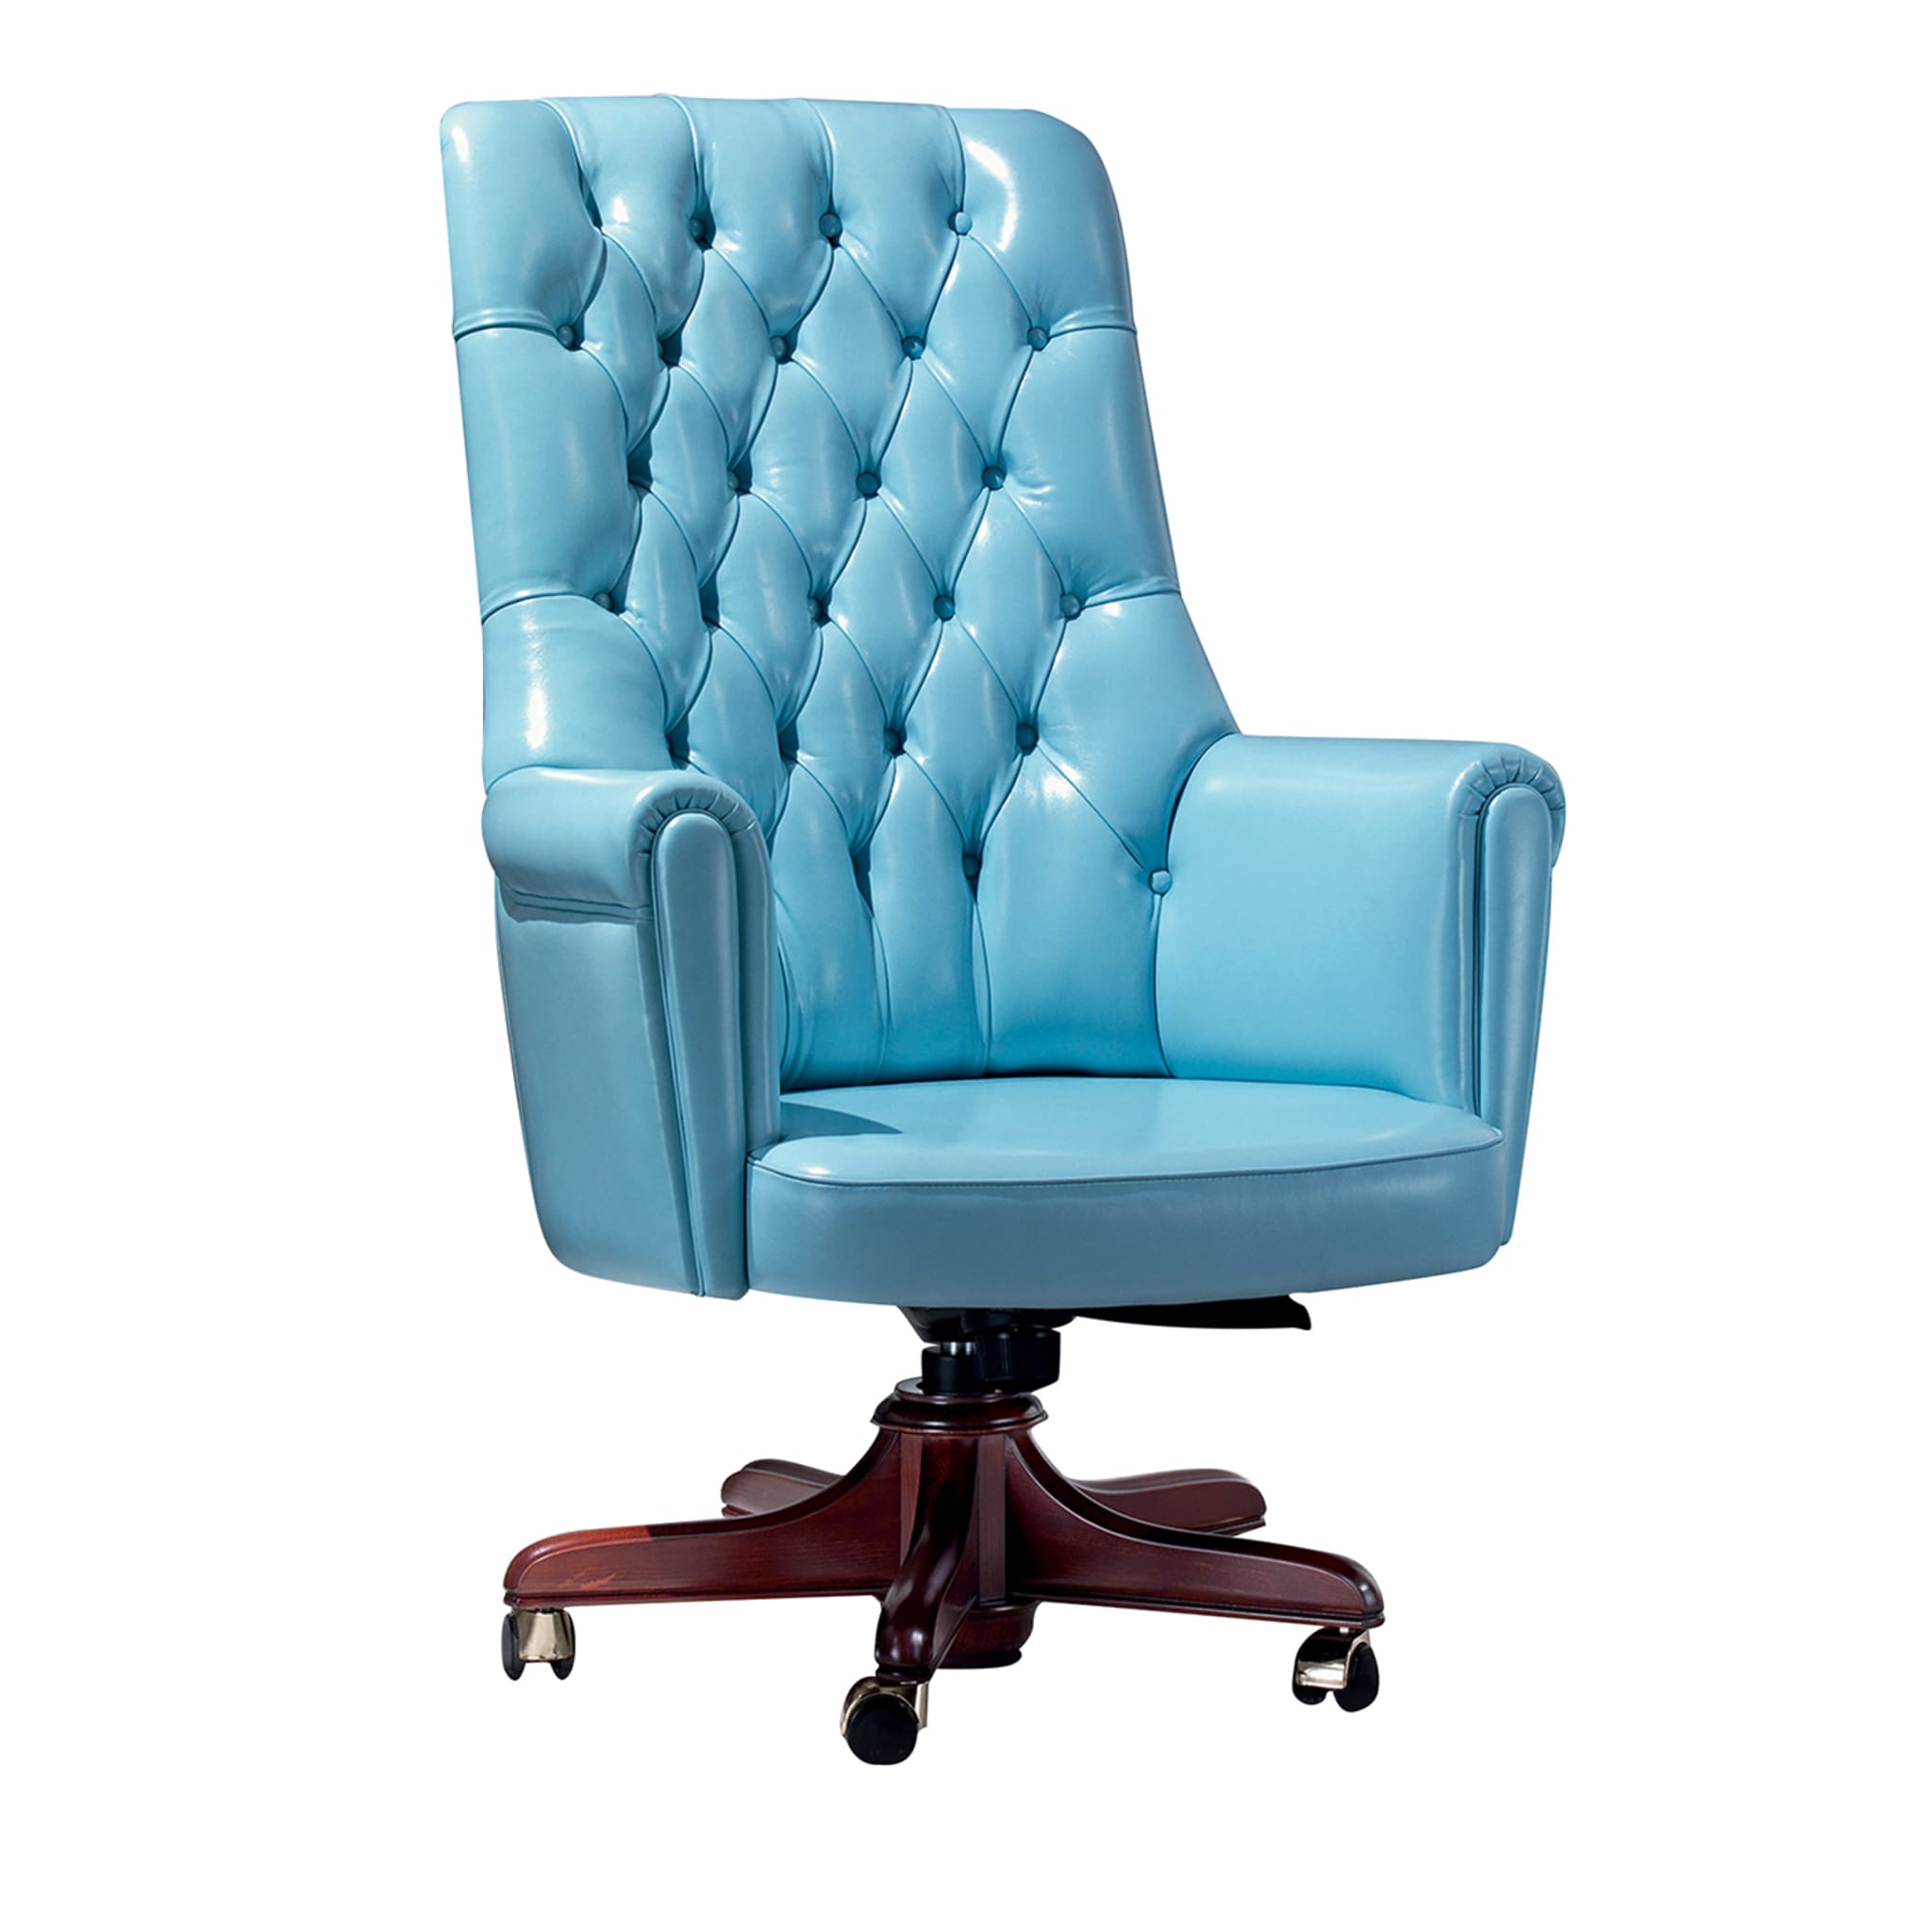 Light Blue Leather Armchair - Main view